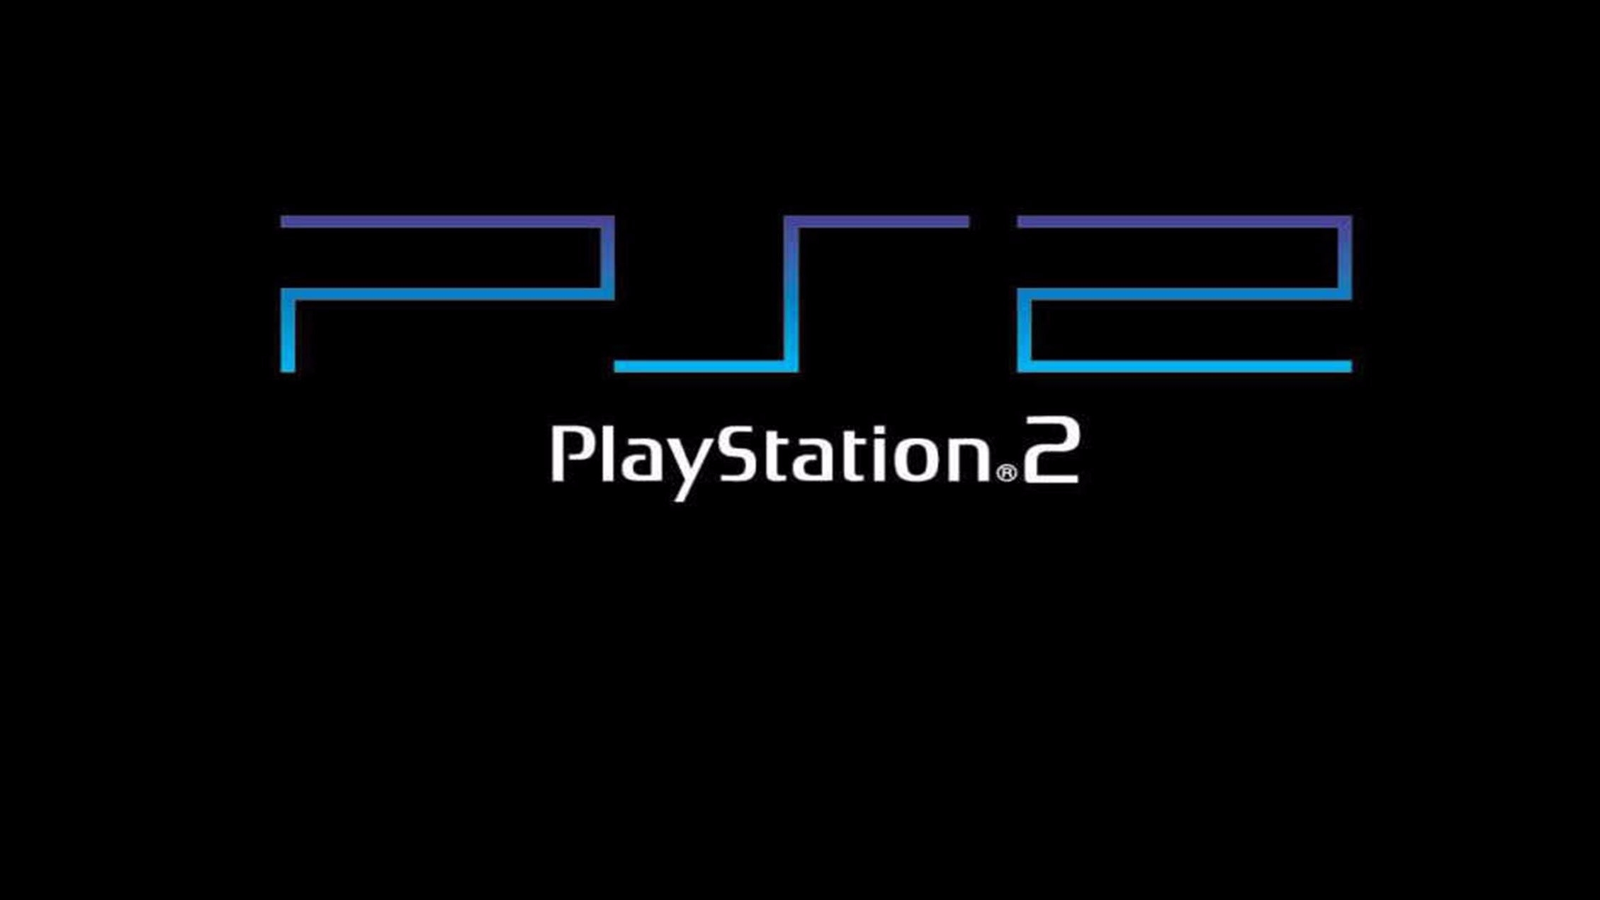 Digital Foundry: Hands-on with PS4's PlayStation 2 emulation